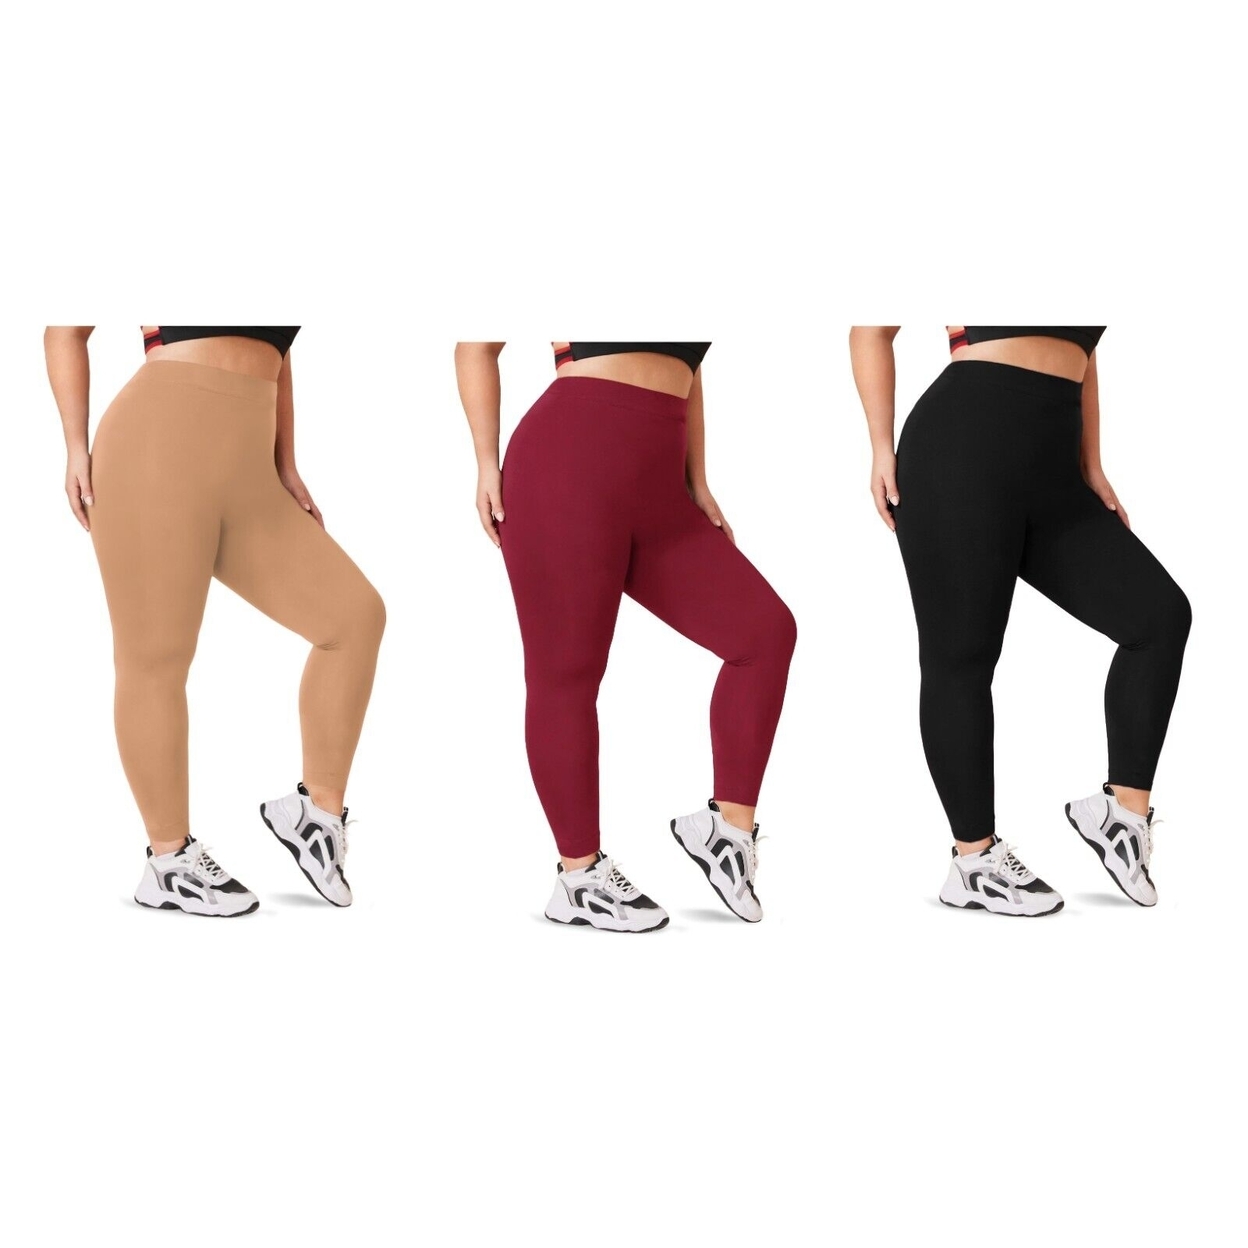 2-Pack: Women's Casual Ultra-Soft Smooth High Waisted Athletic Active Yoga Leggings Plus Size Available - Beige & Red, 2x